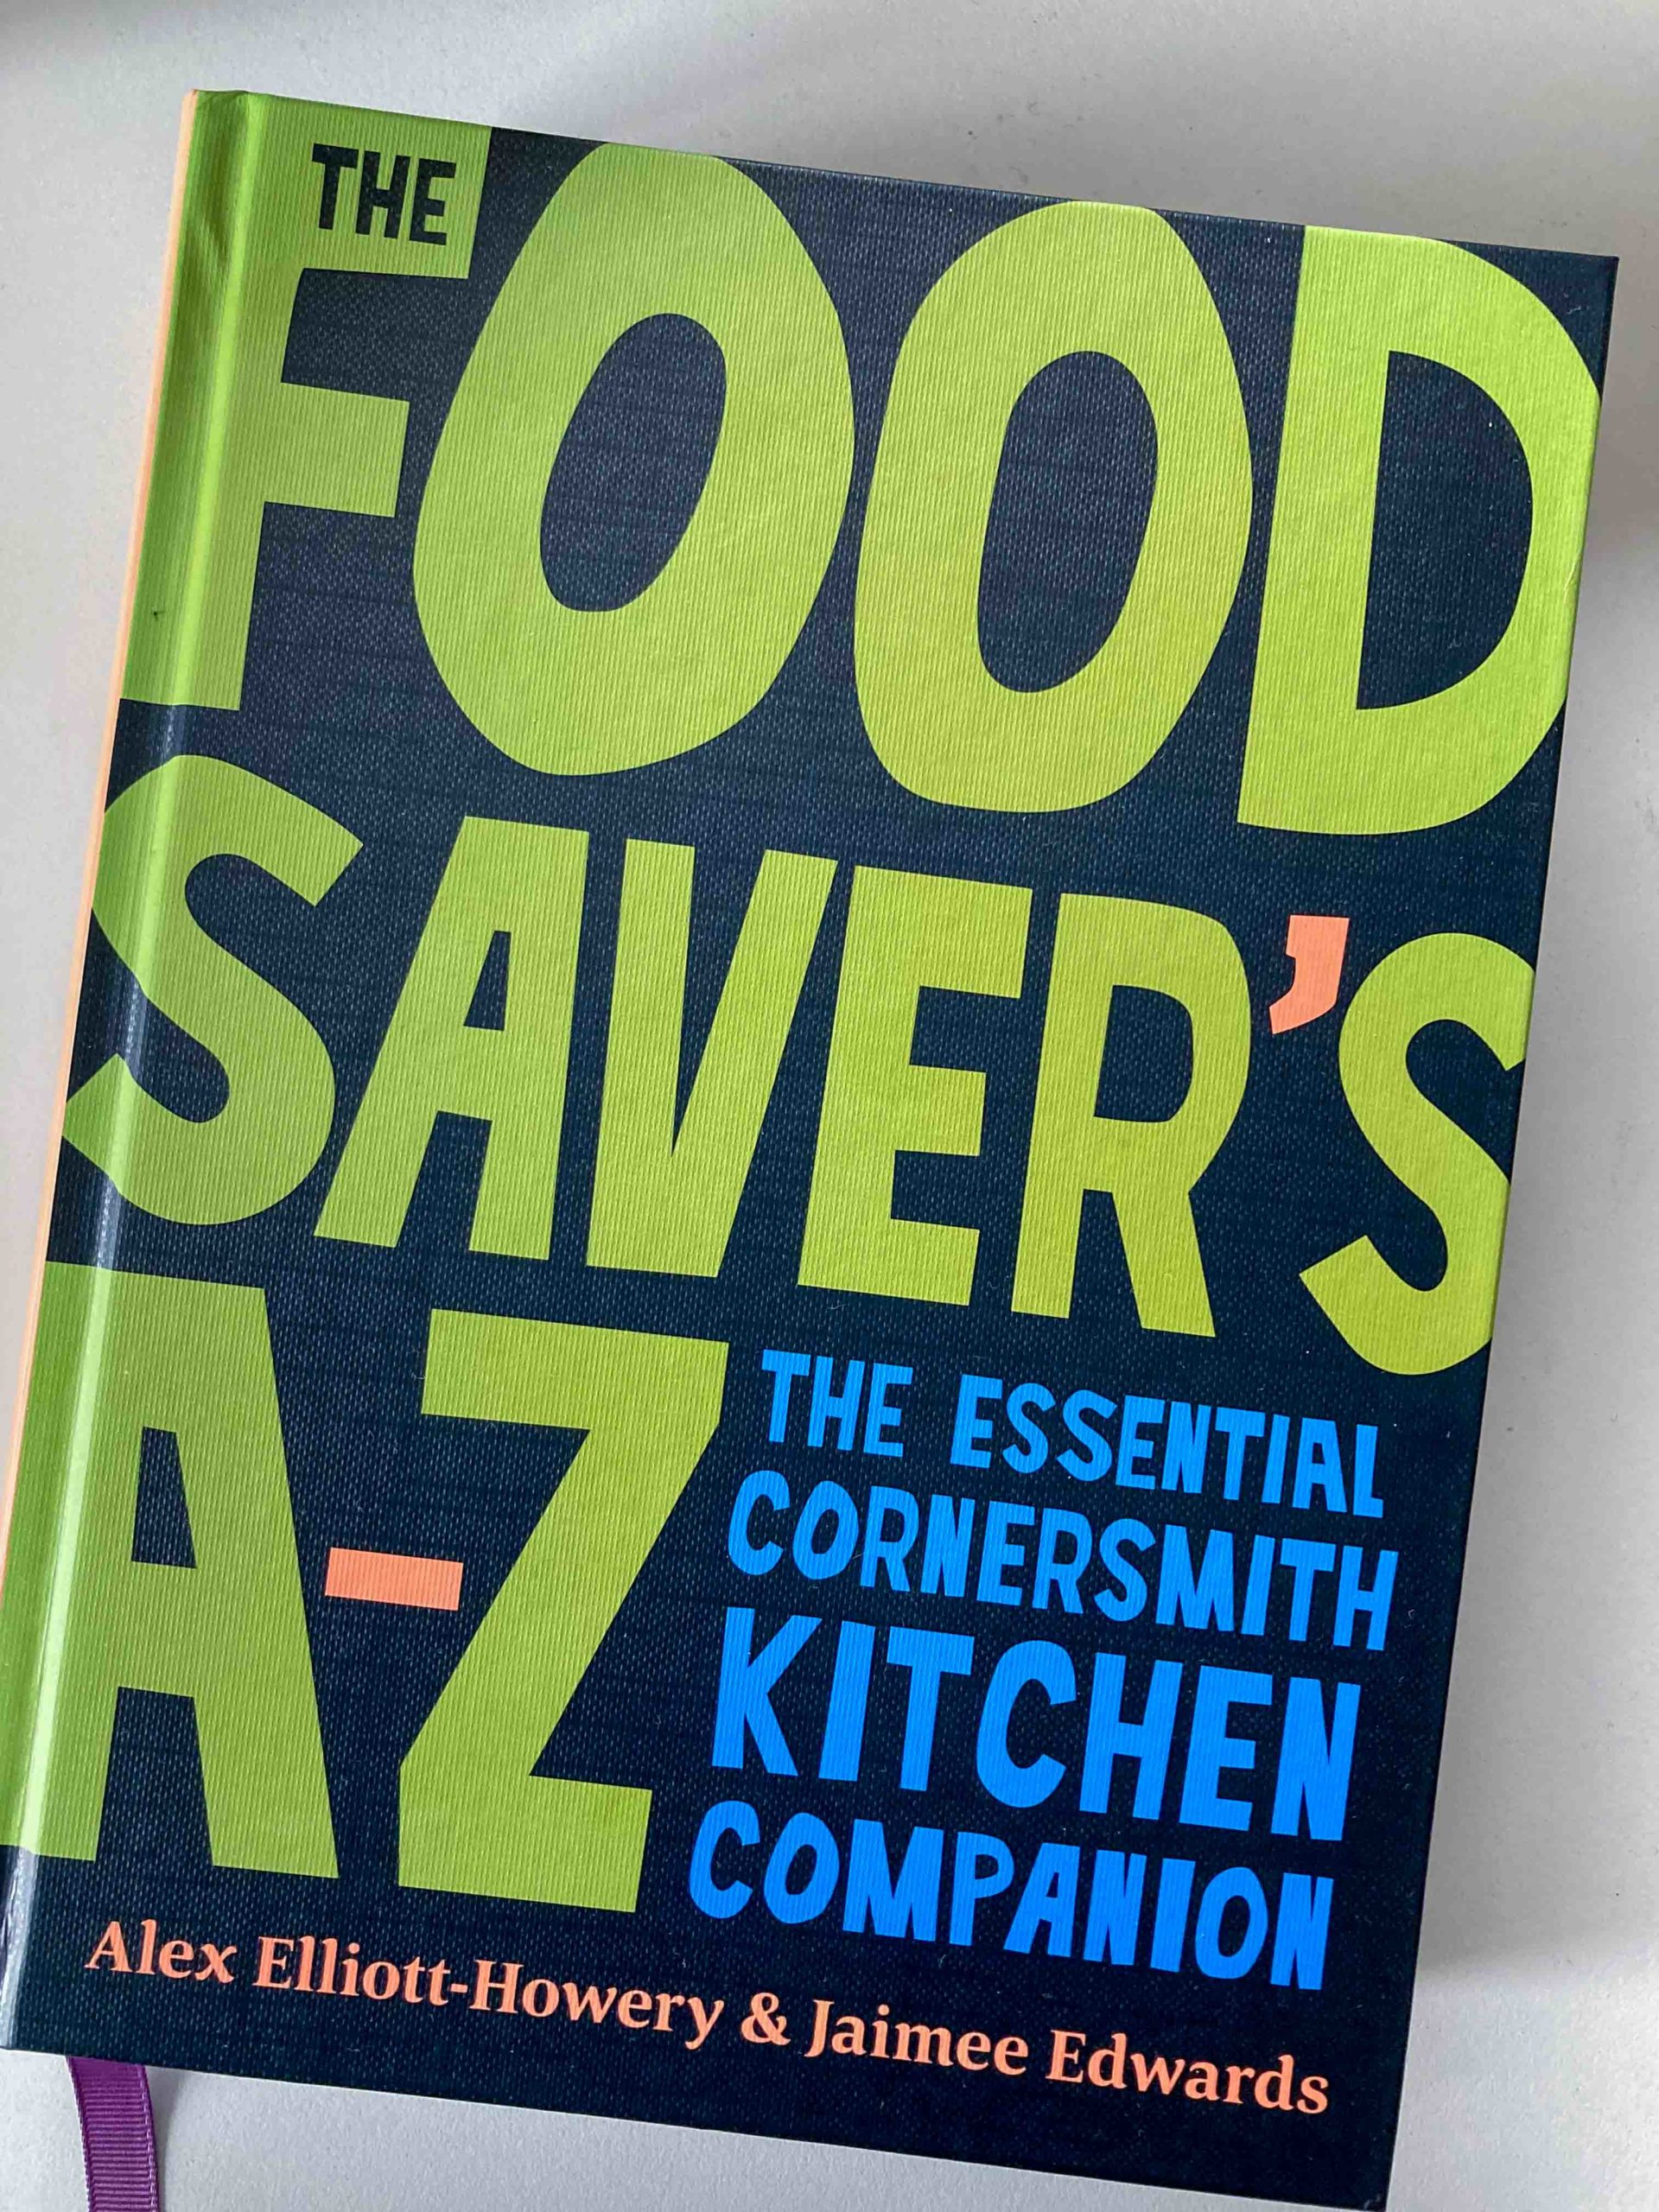 The cover of a book with a back cover and the words The Food Saver's A-Z The Essential Cornersmith Kitchen Companion